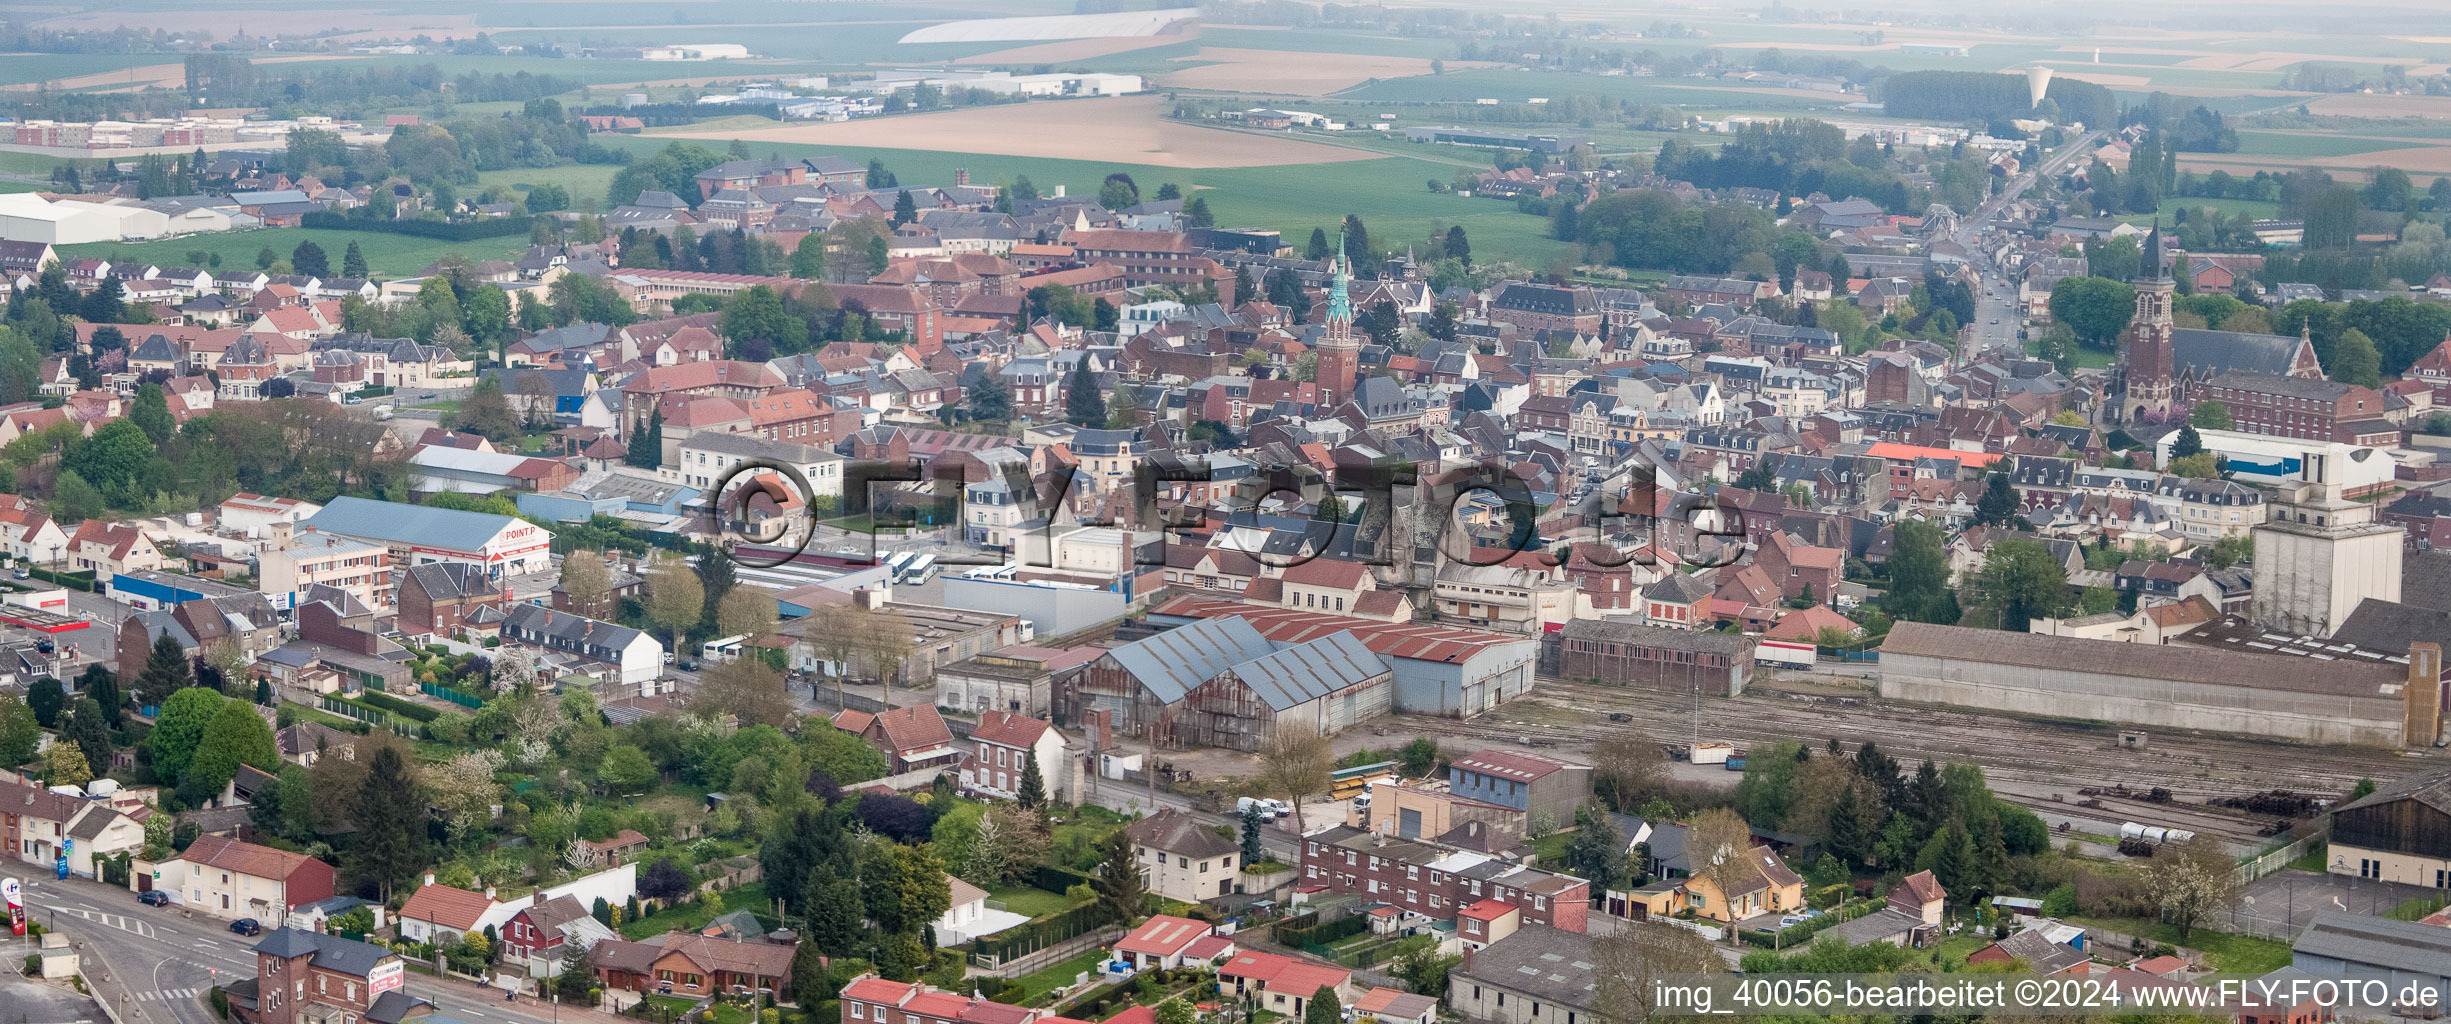 Panoramic perspective Town View of the streets and houses of the residential areas in Bapaume in Hauts-de-France, France